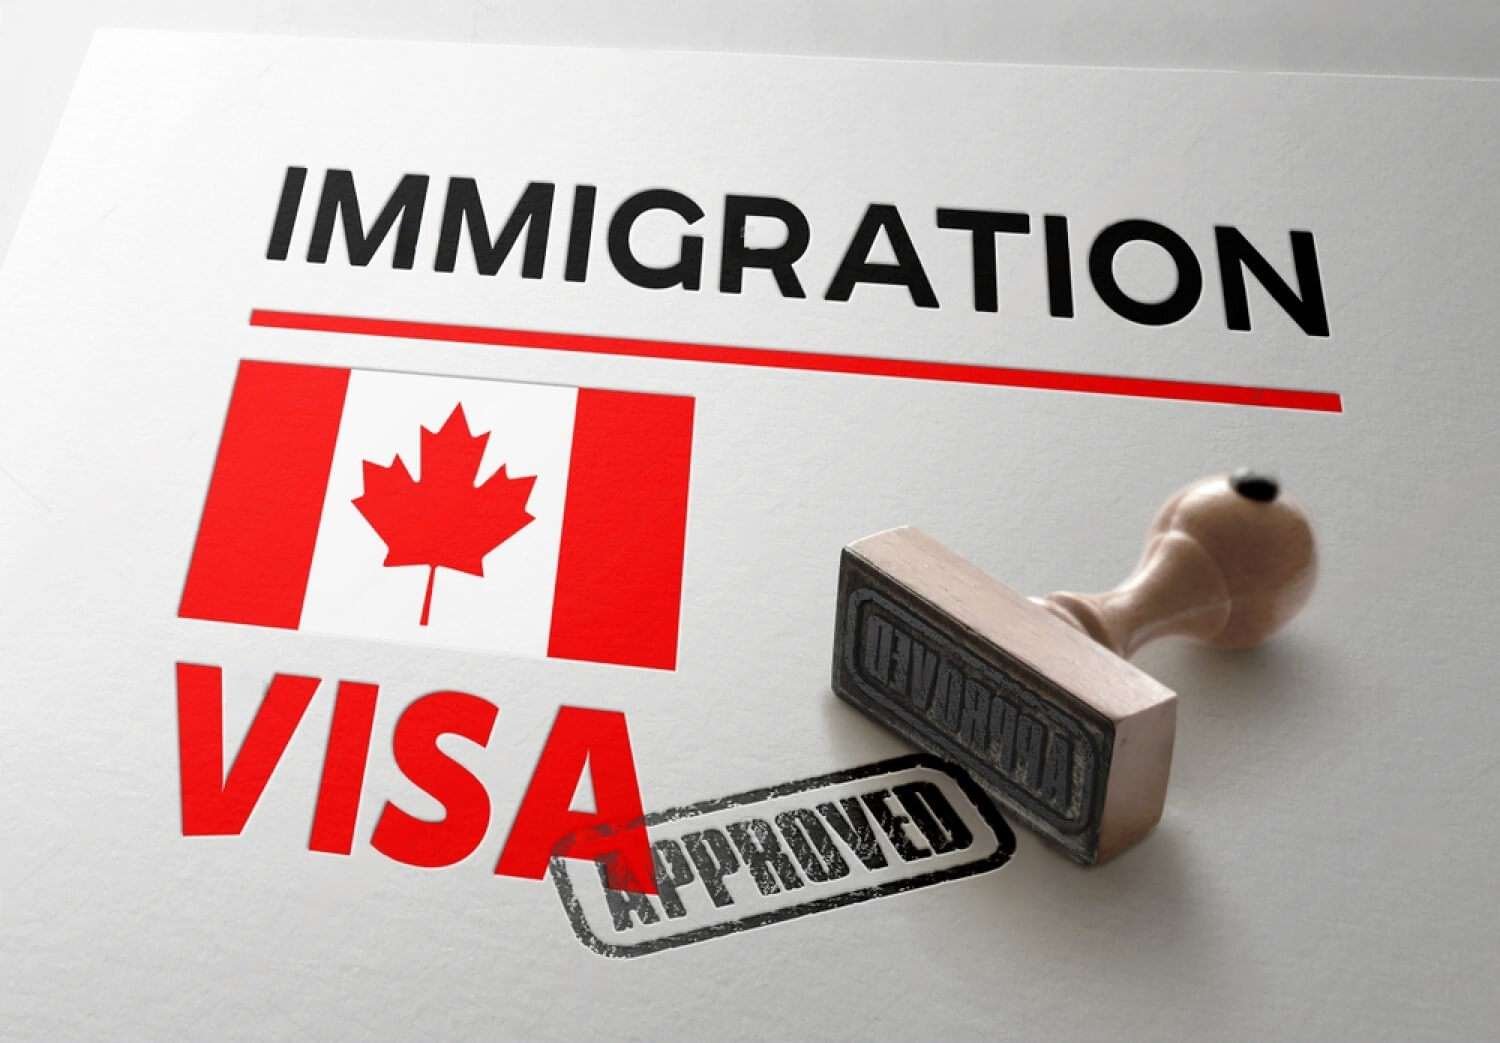 Your-Complete-guidelines-to-Canadian-Visas-Travel-Study-Work-and-Family-Reunification-MigrantsGuide.